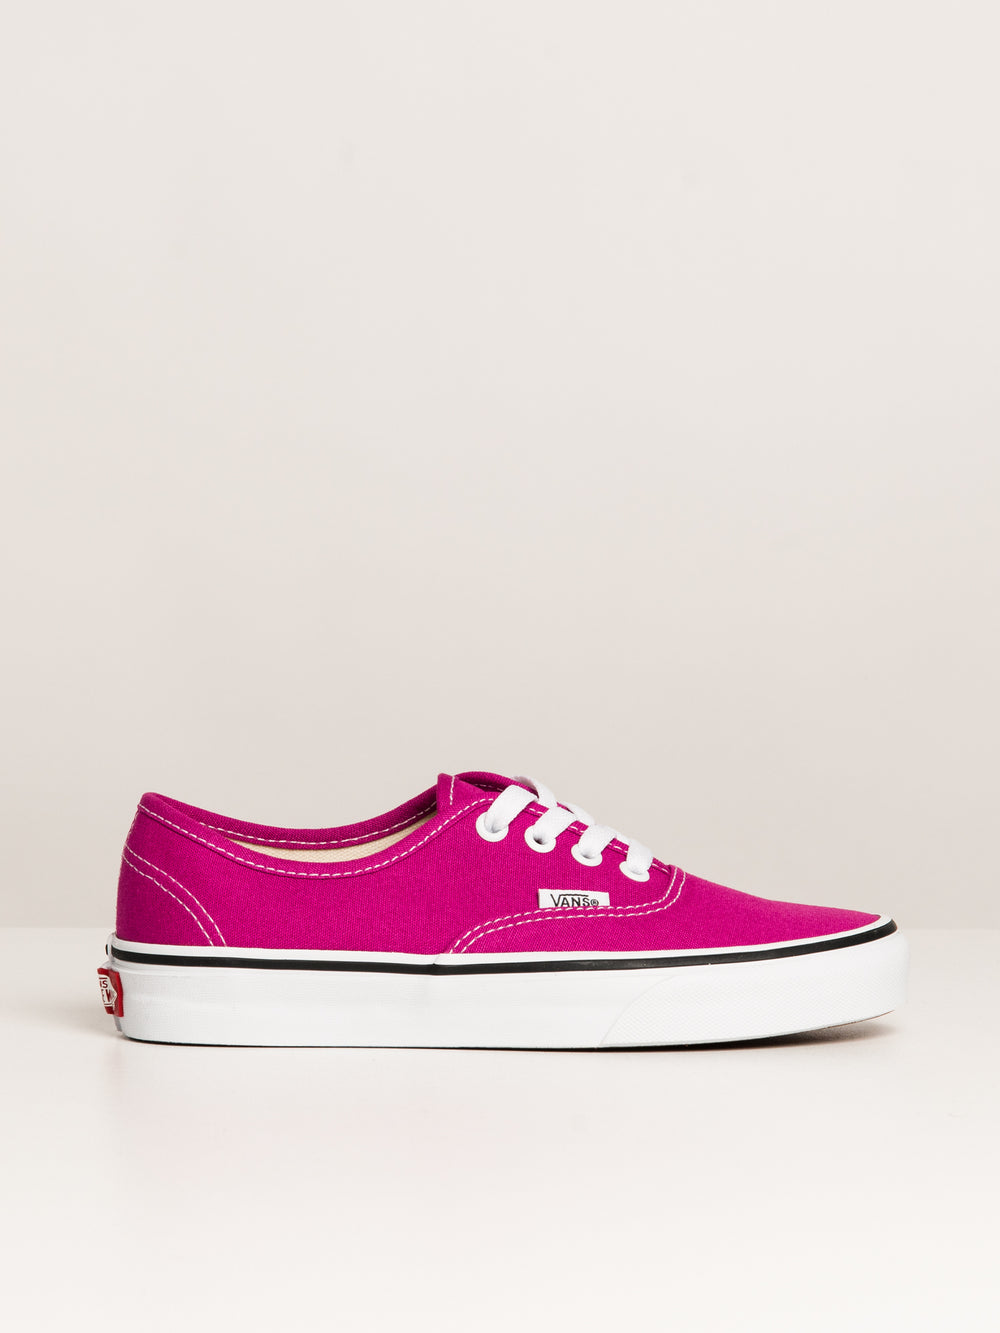 WOMENS VANS AUTHENTIC FUCHSIA R SNEAKER - CLEARANCE